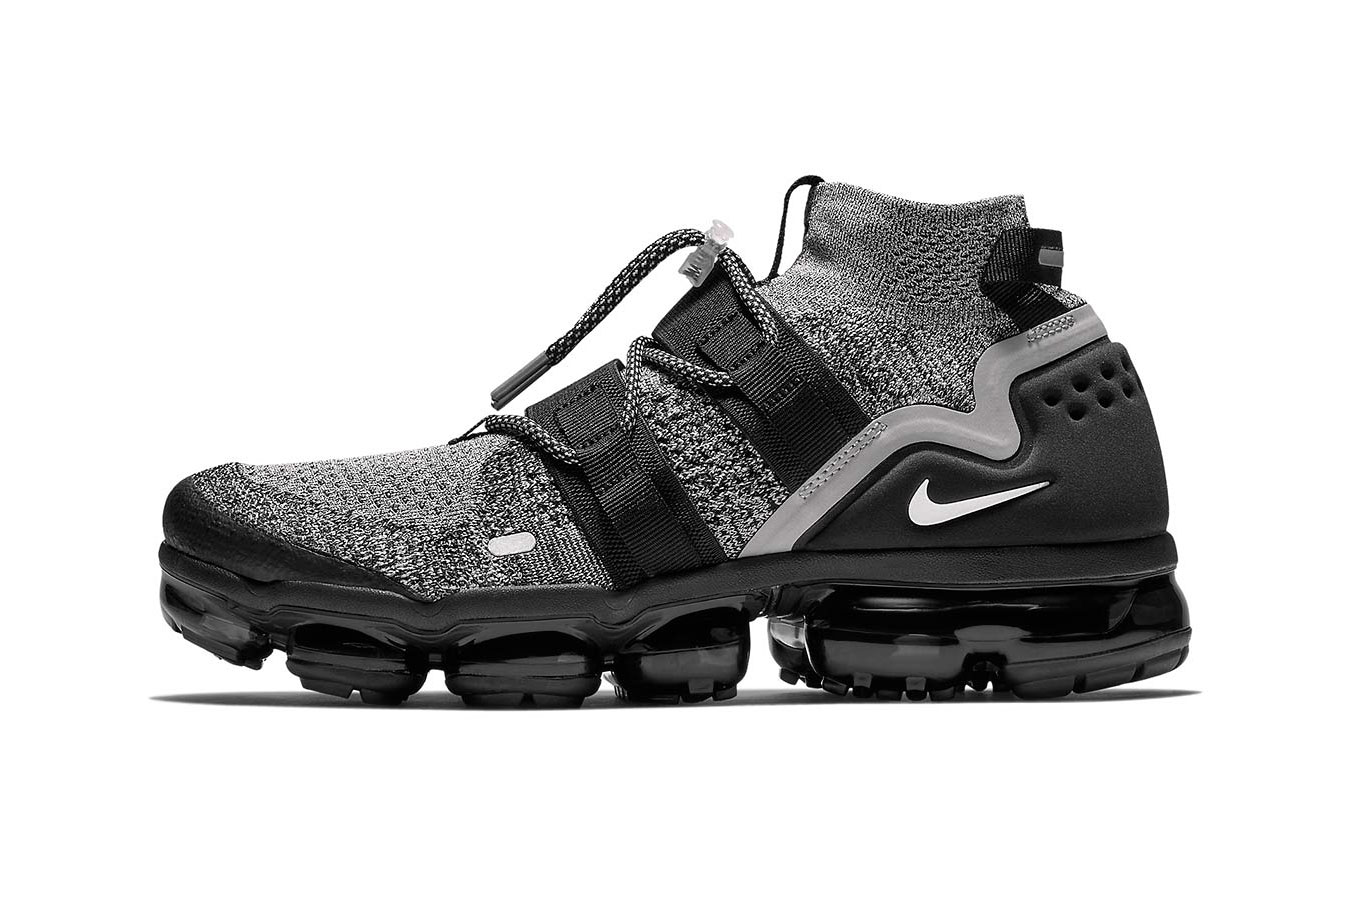 Zanahoria Hassy Perseguir Nike VaporMax Flyknit Utility "Moon Particle" | Hypebeast